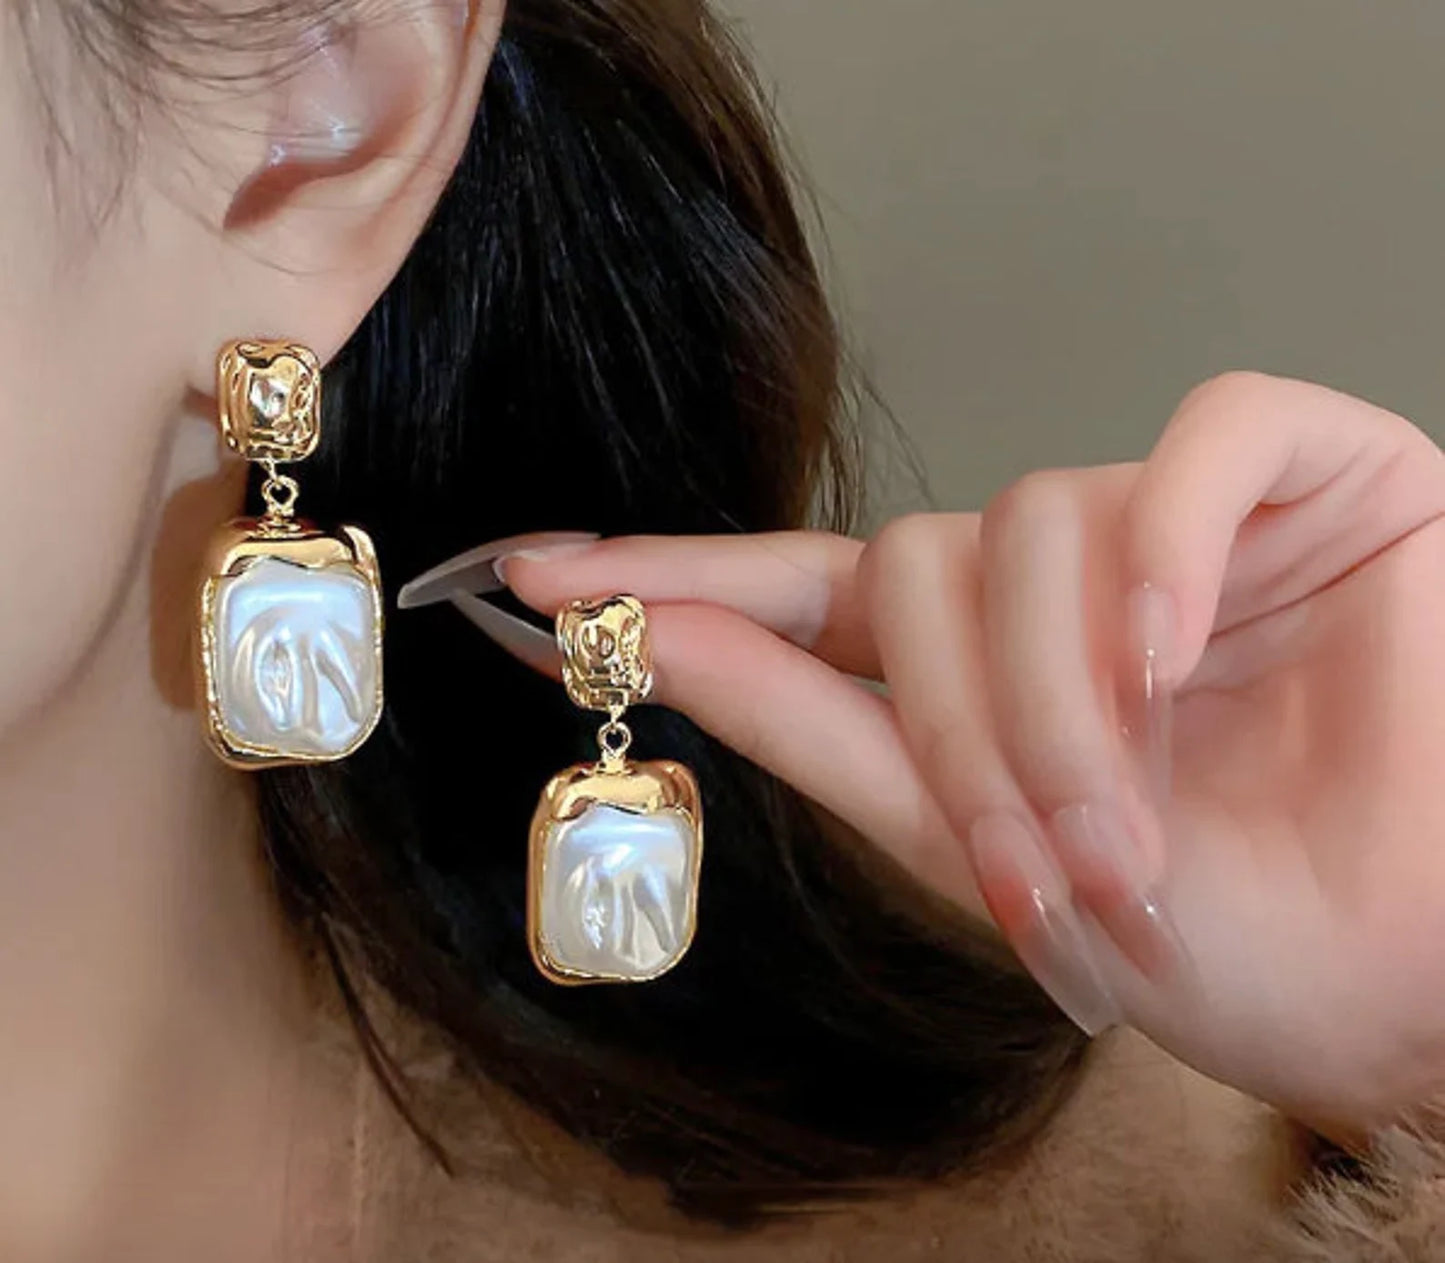 Square Pearl and Gold Earrings